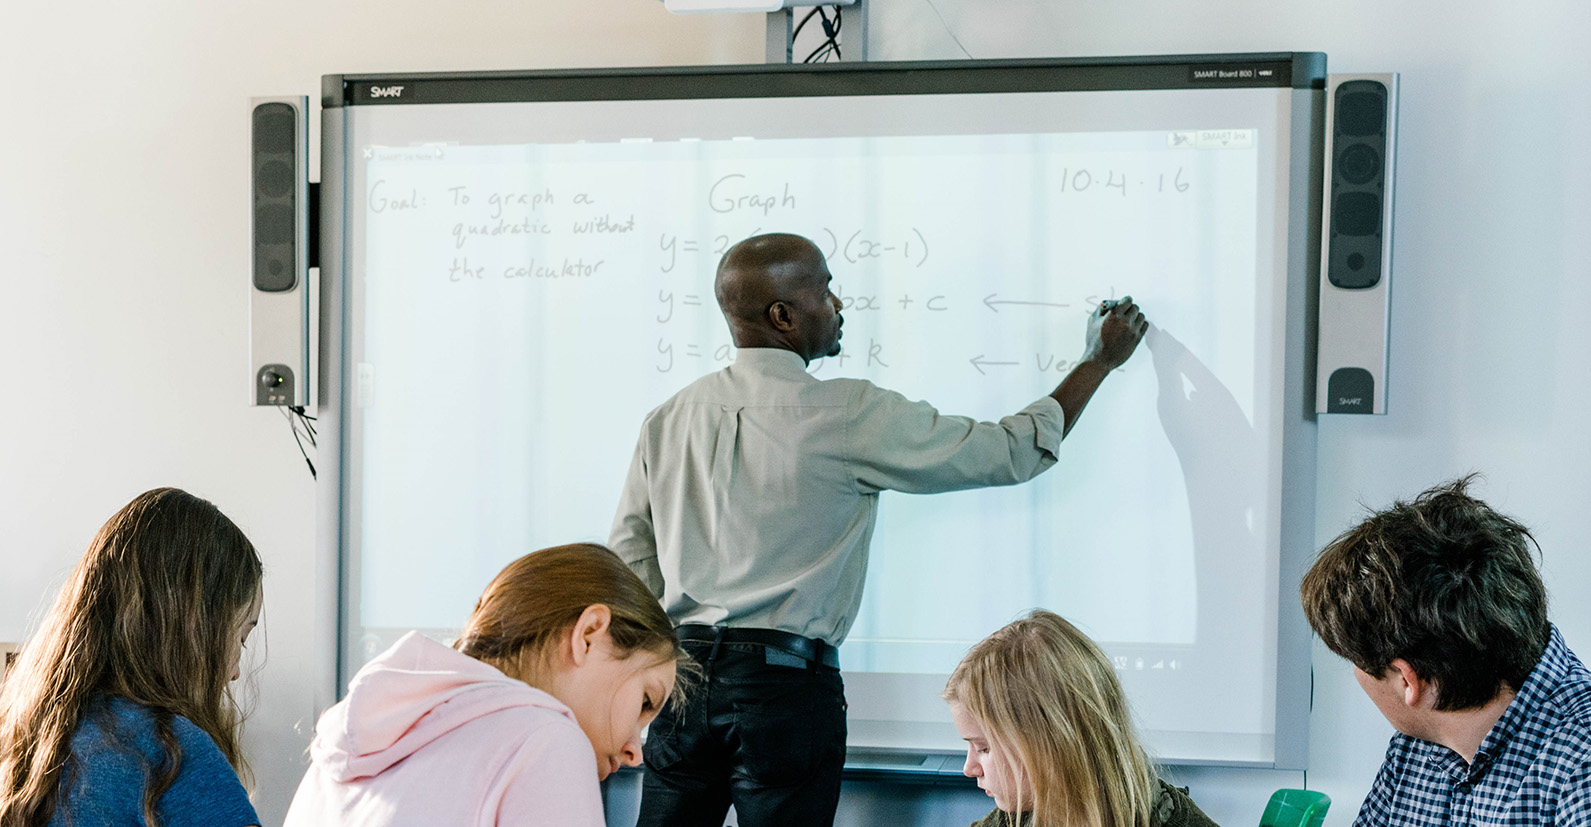 In a mathematics lesson, a teacher illustrates an issue on a smartboard. He is seen from the side at an angle.